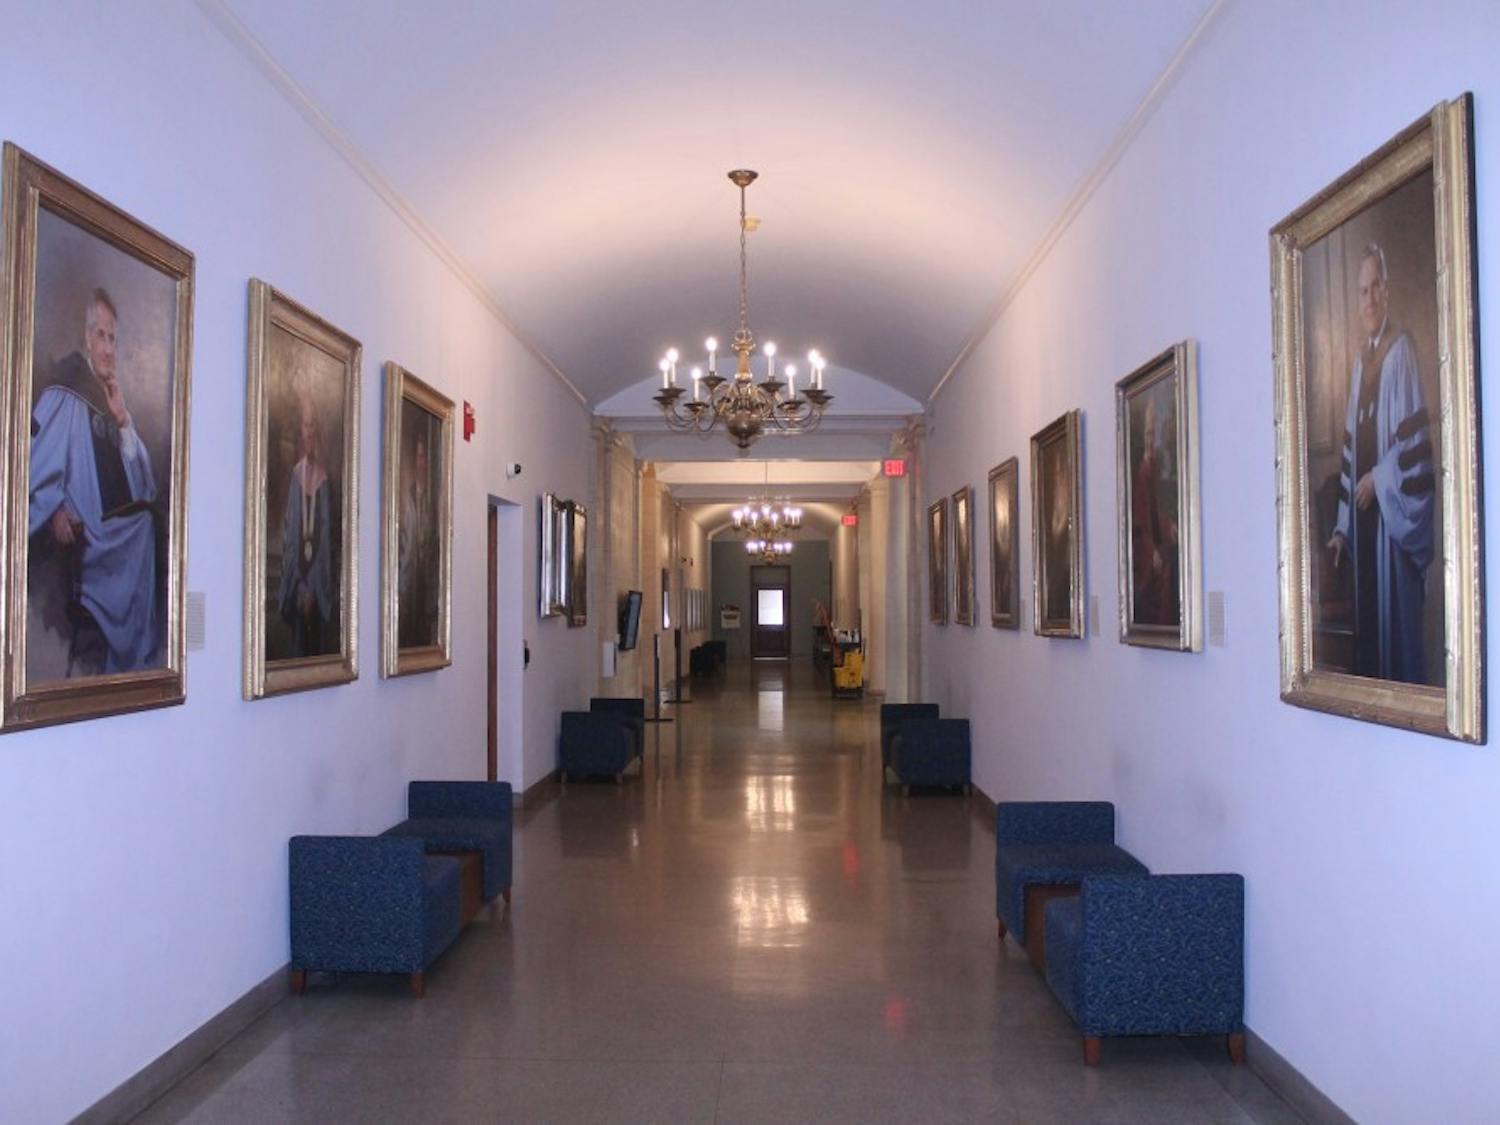 Portraits of former UNC chancellors line the walls of Wilson Library on the campus of the University of North Carolina at Chapel Hill.&nbsp;